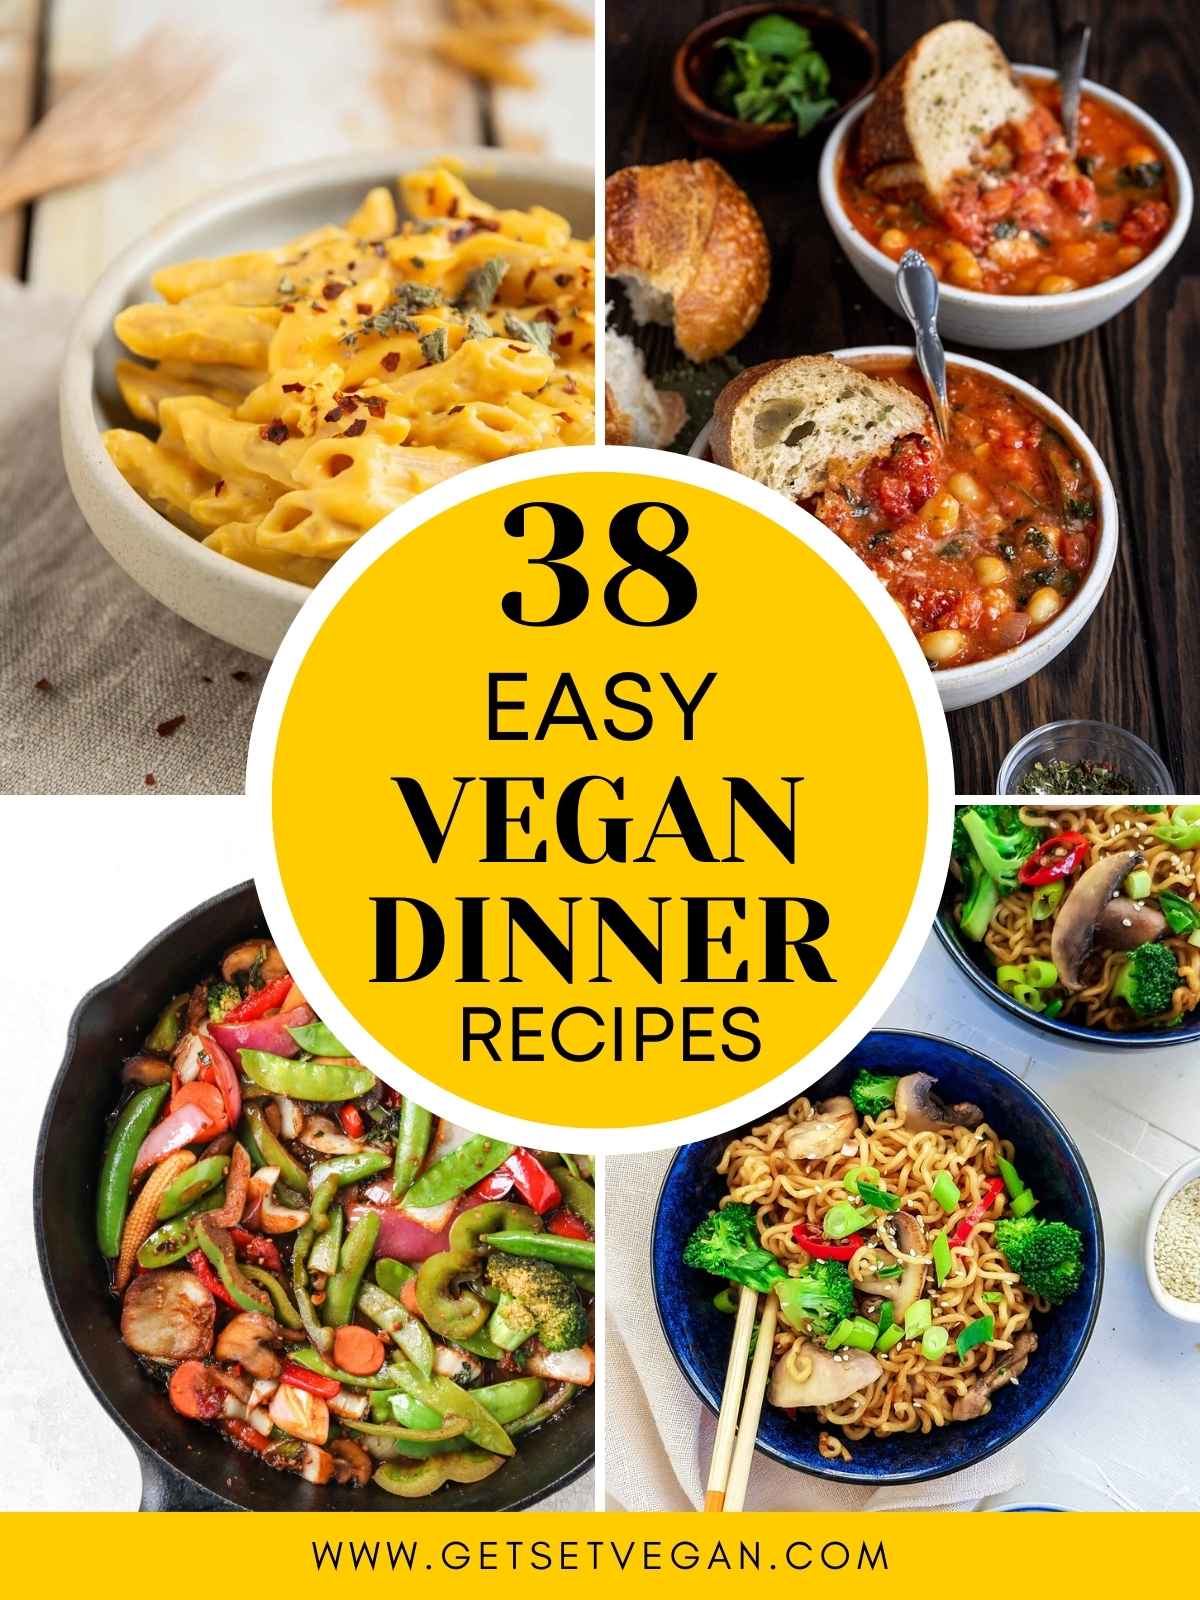 Collage of easy vegan dinner recipes with a title in the middle.